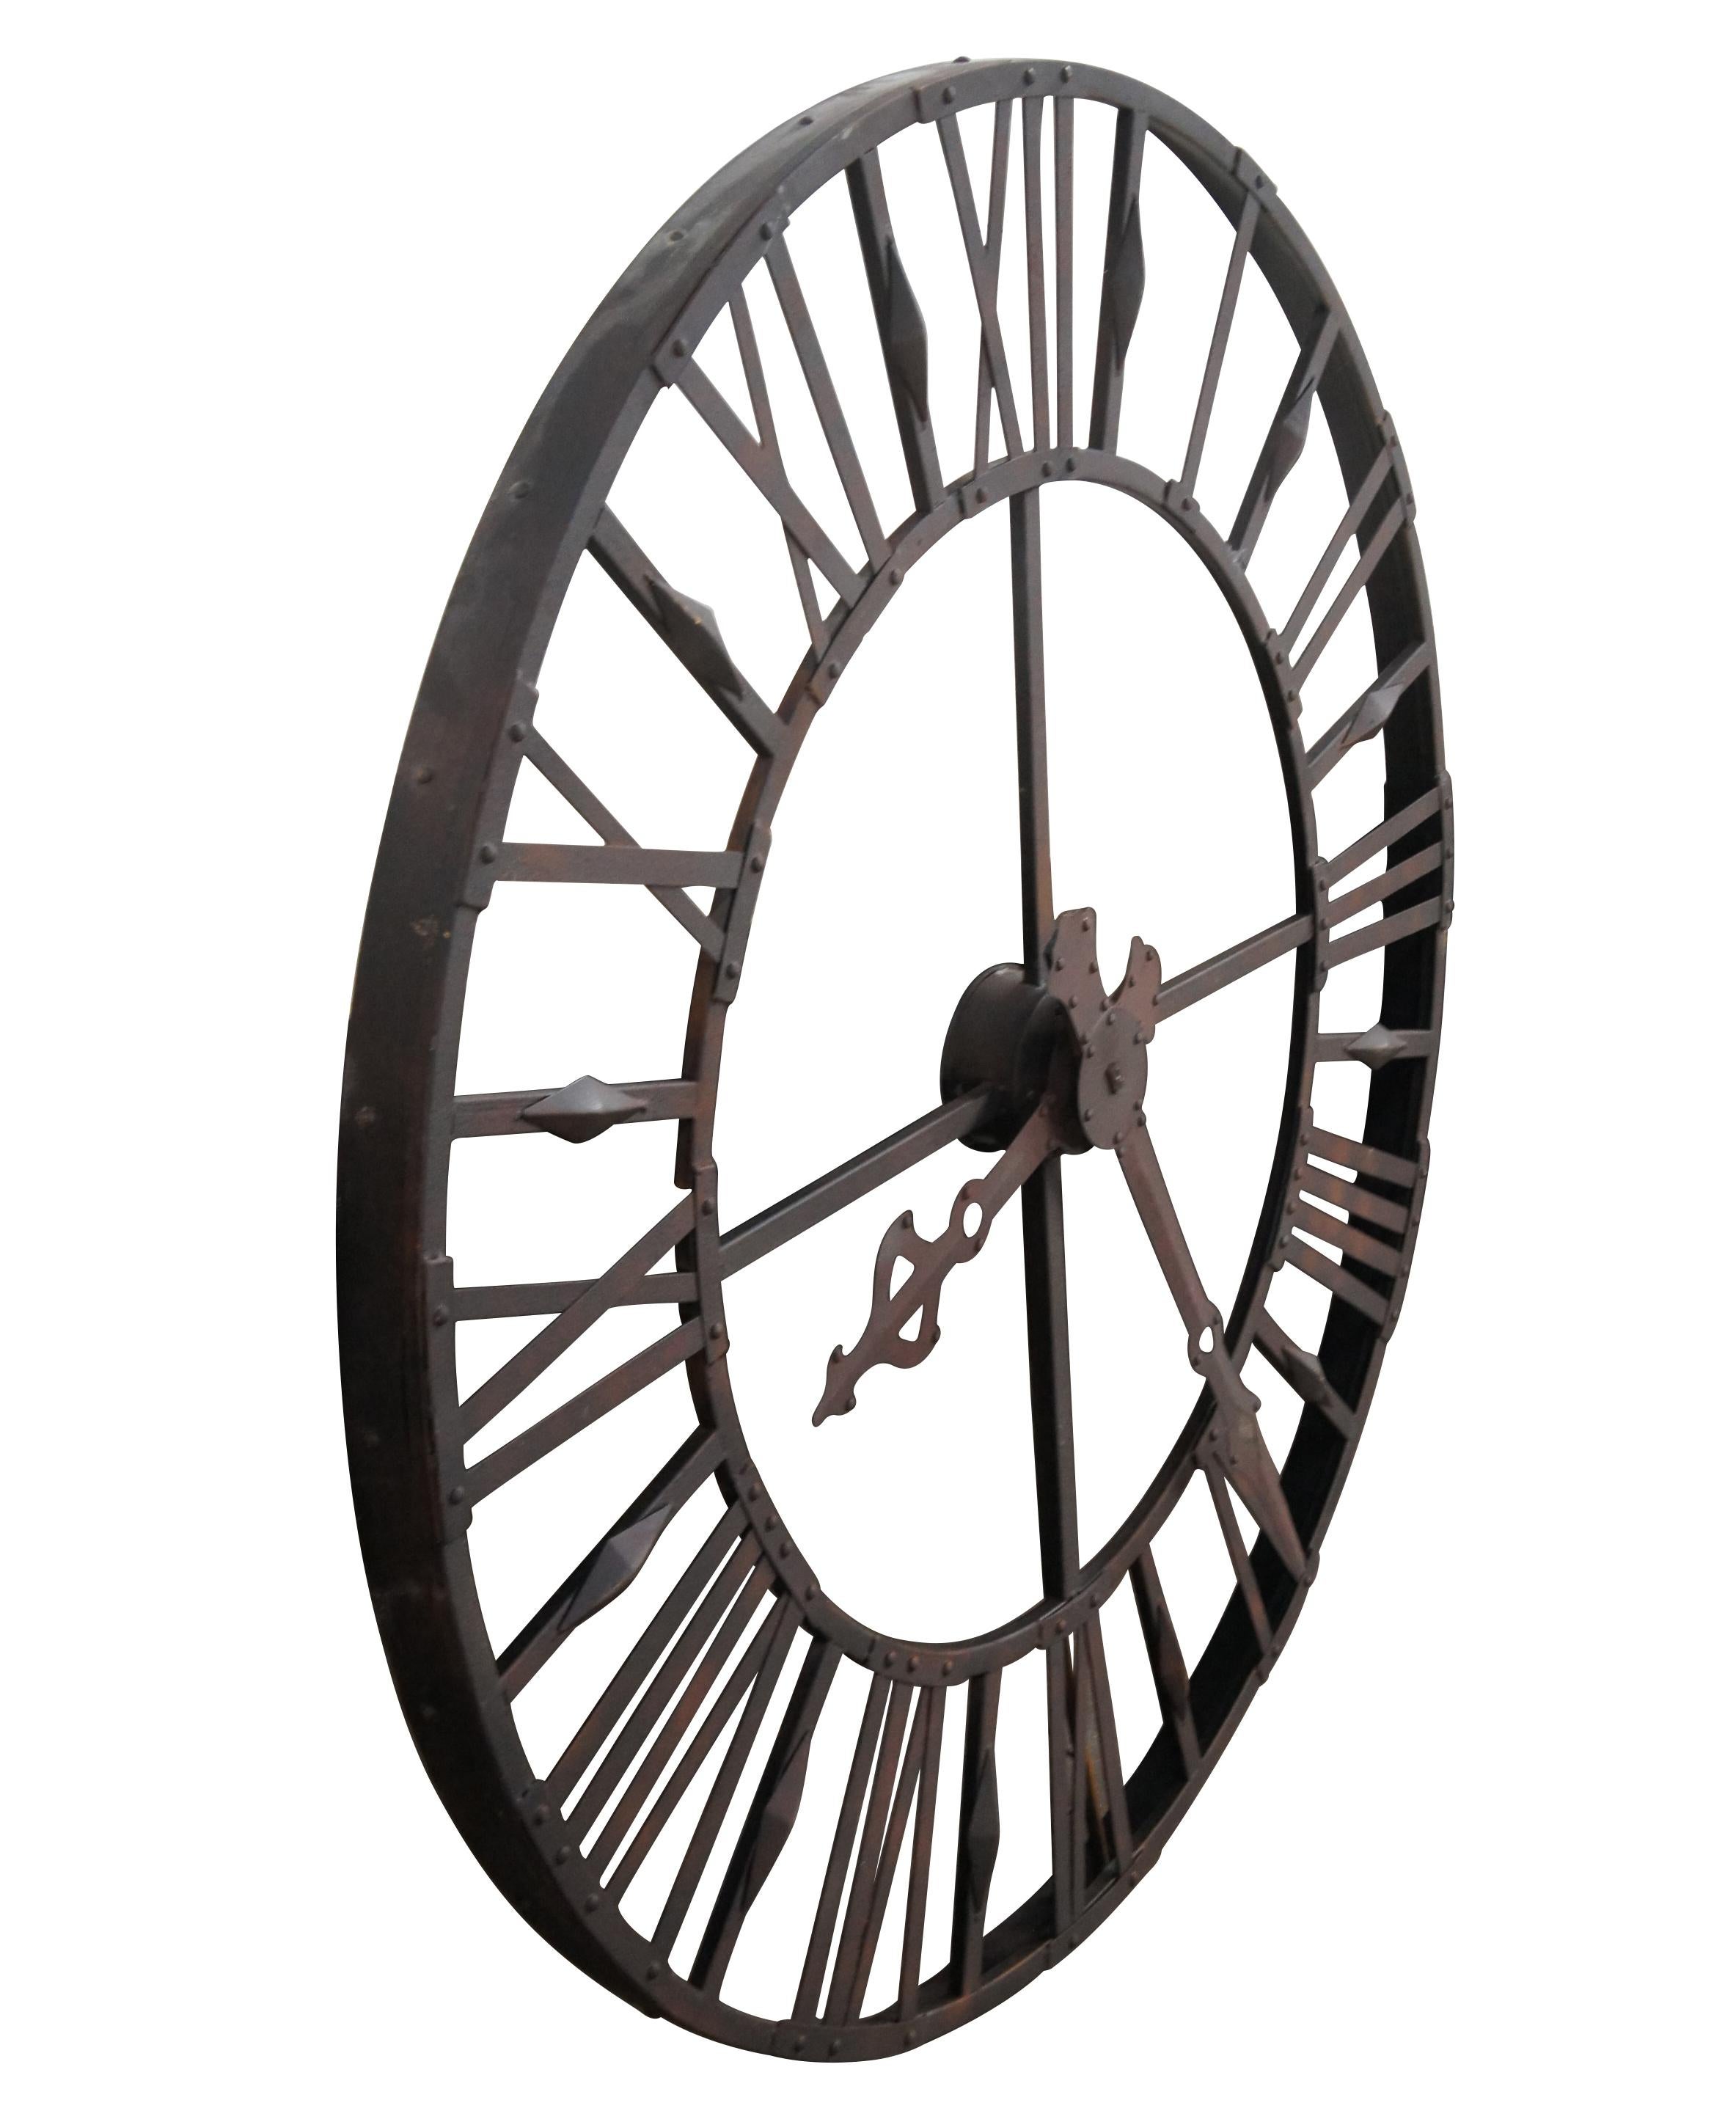 Grand in every sense of the word, this colossal 5-foot timepiece accurately replicates a 19th century clock that once tolled the hours from a church tower high above a Belgian town. With elegant Roman numerals and elongated 28